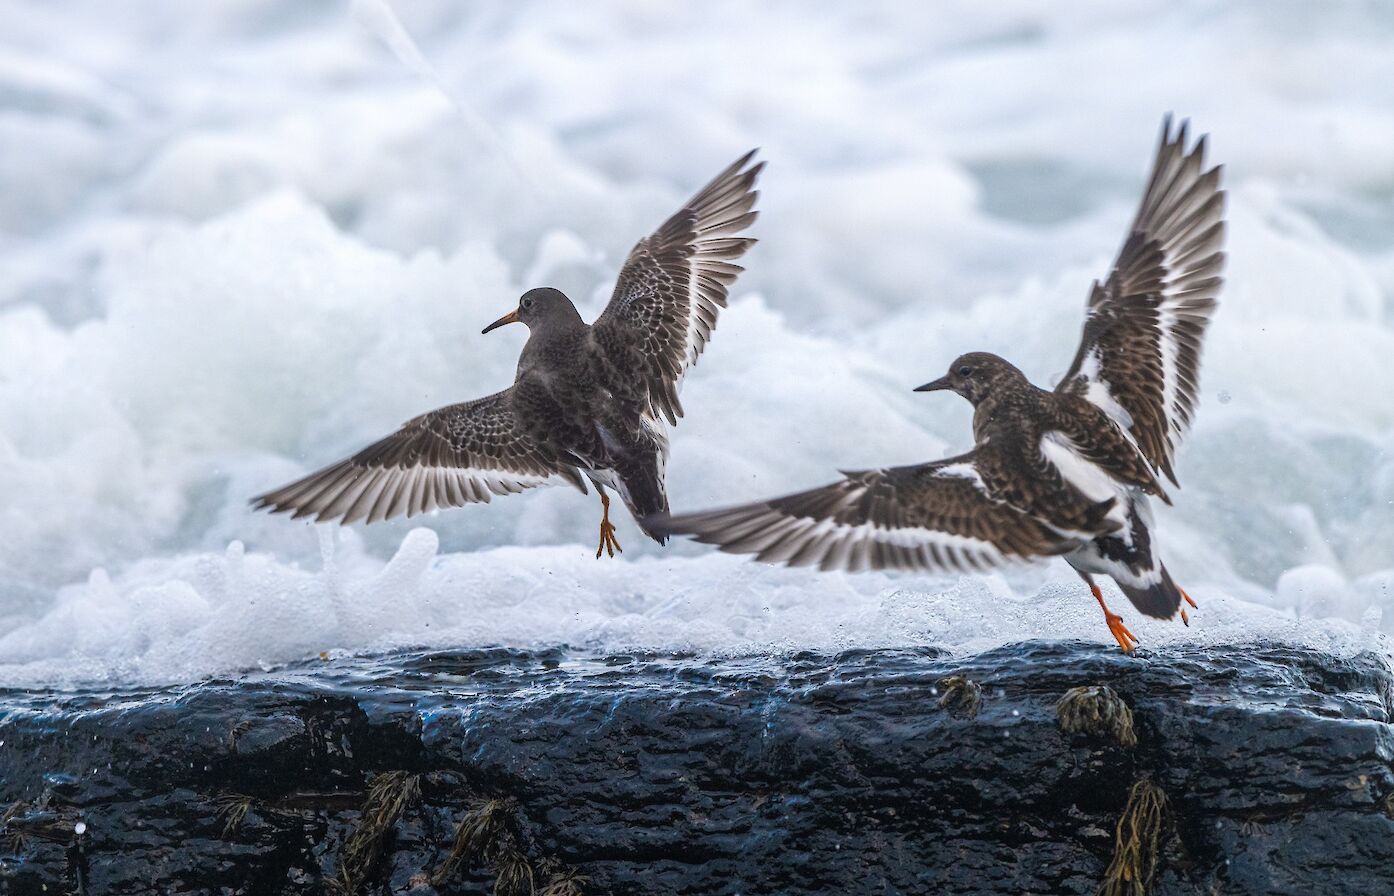 Purple sandpipers in Westray, Orkney - image by Raymond Besant